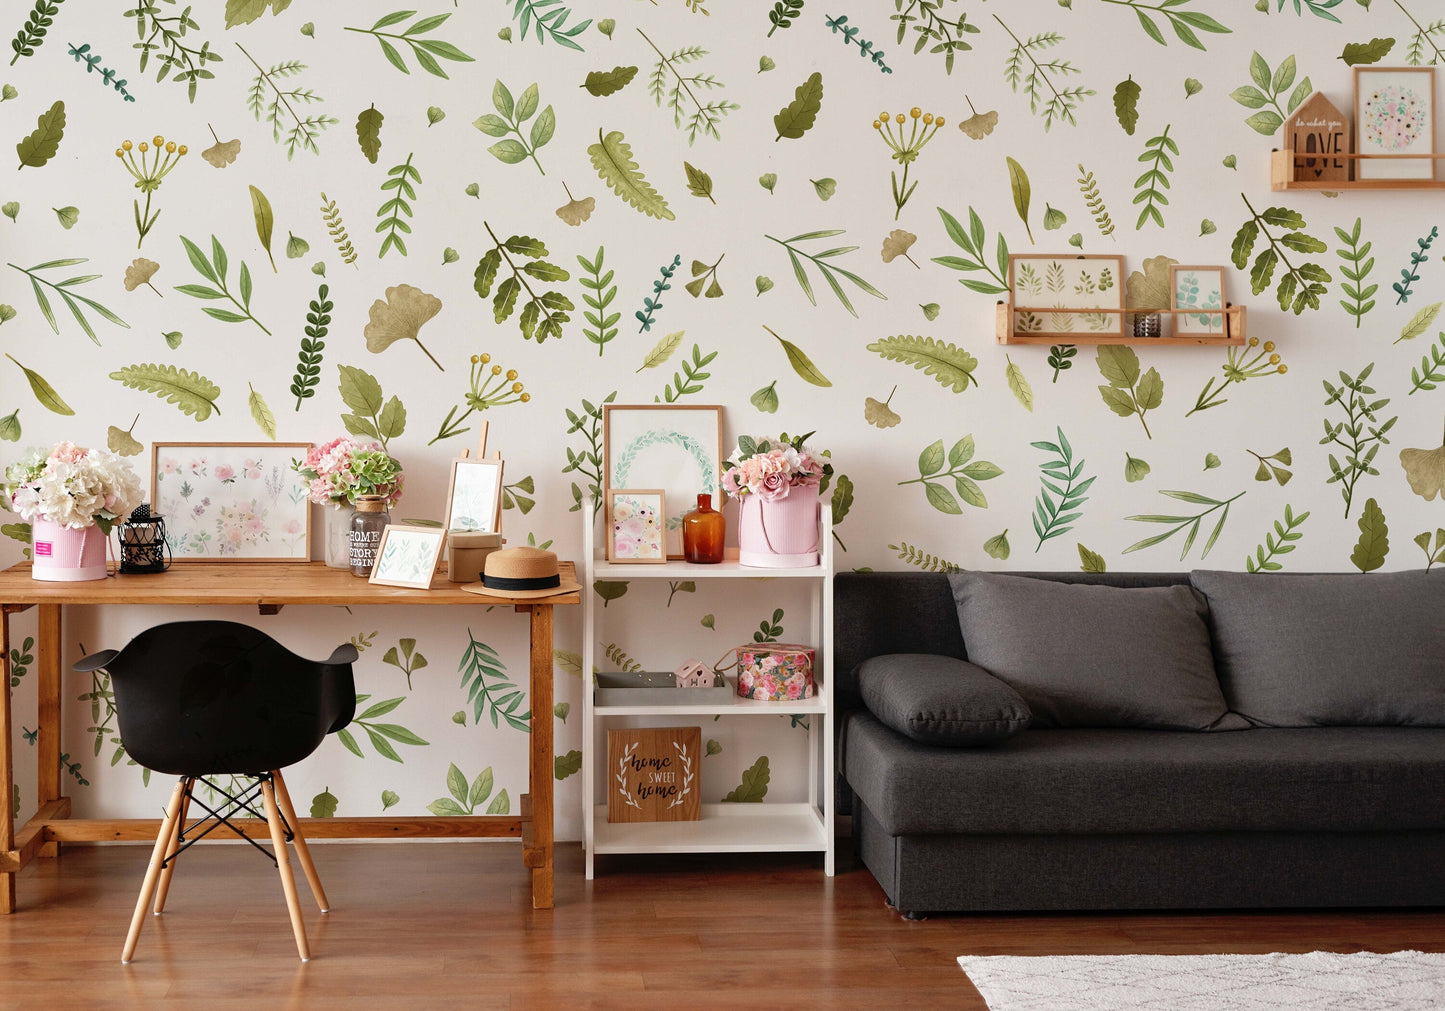 Greenery Wall Decals Leaf Nature Nursery Stickers, LF417